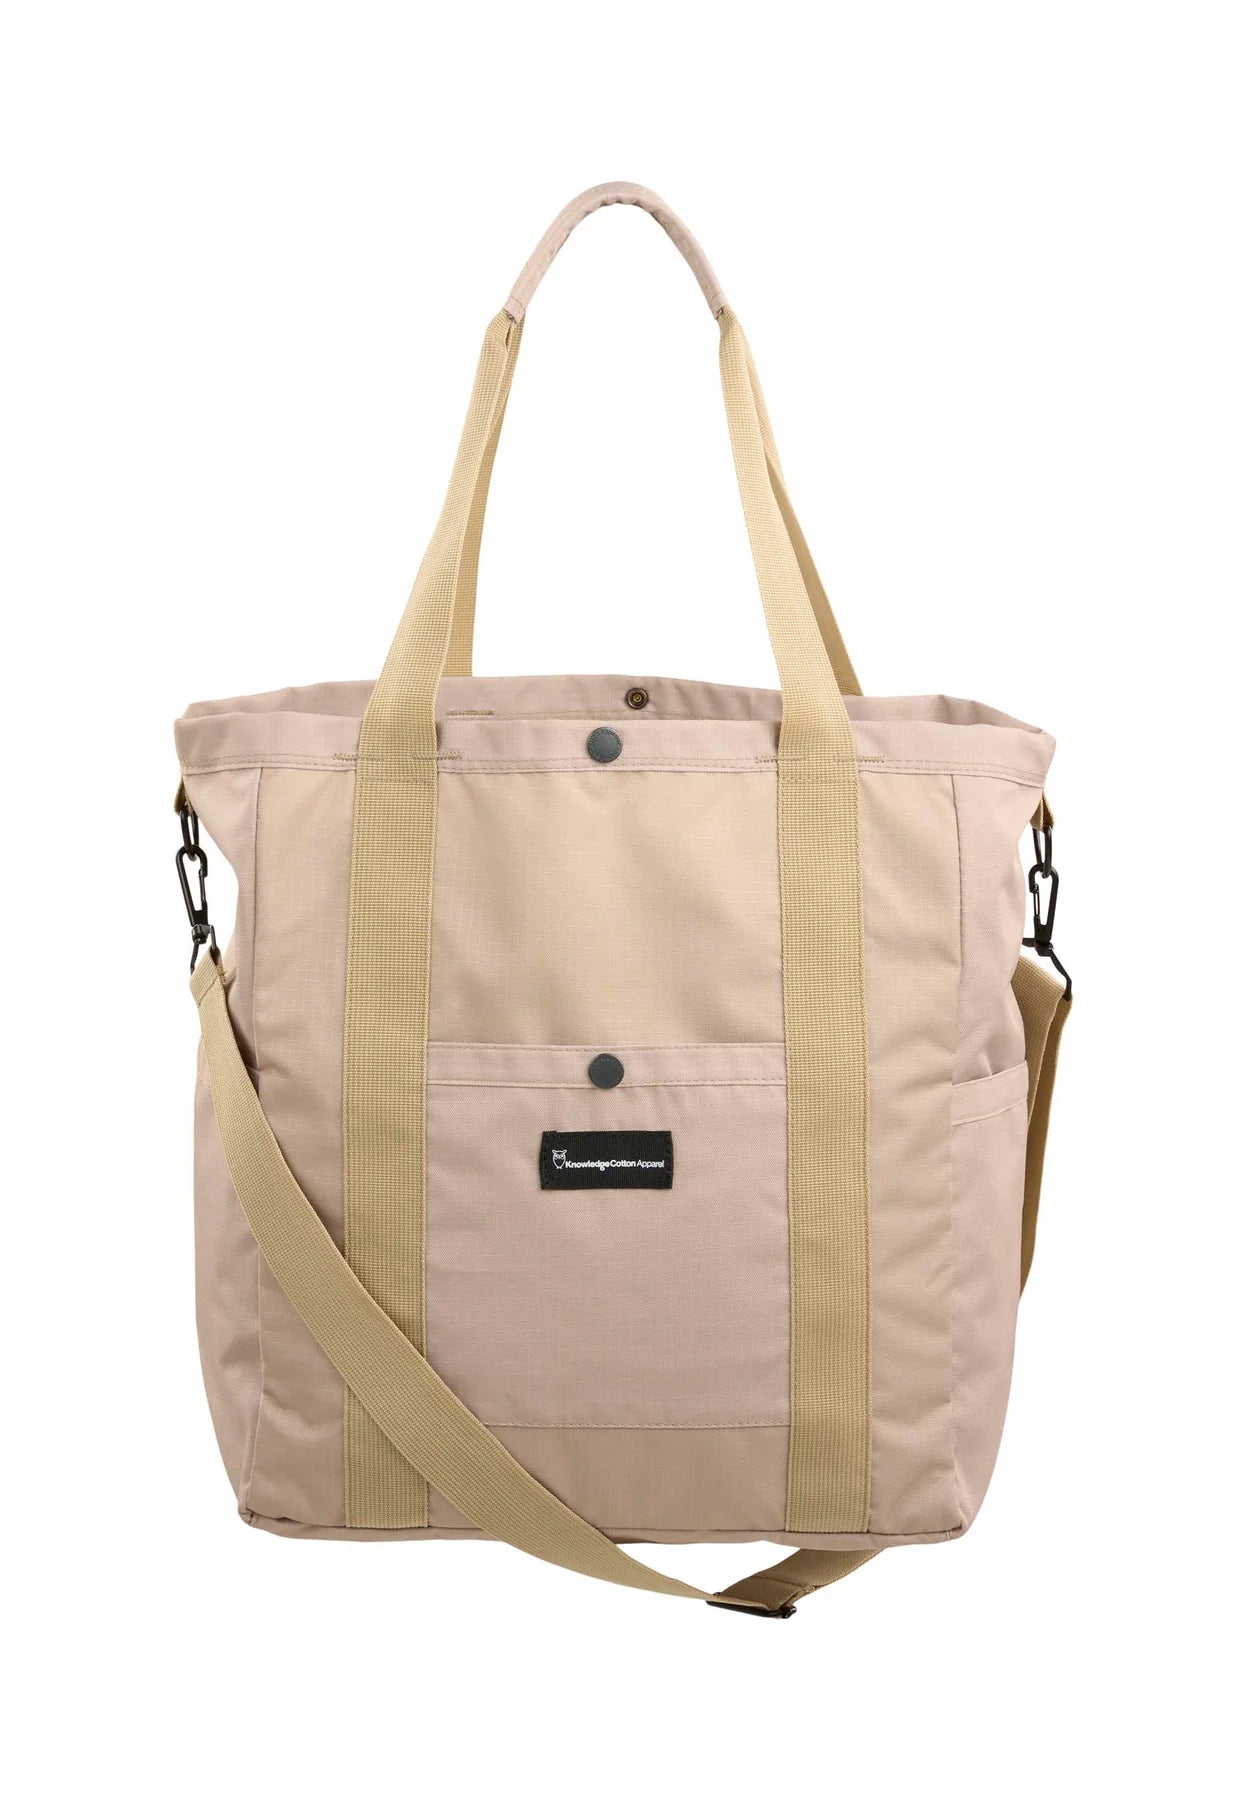 Ethically Made 100% Organic Cotton Canvas Tote Bag – Kindred Apparel Inc.